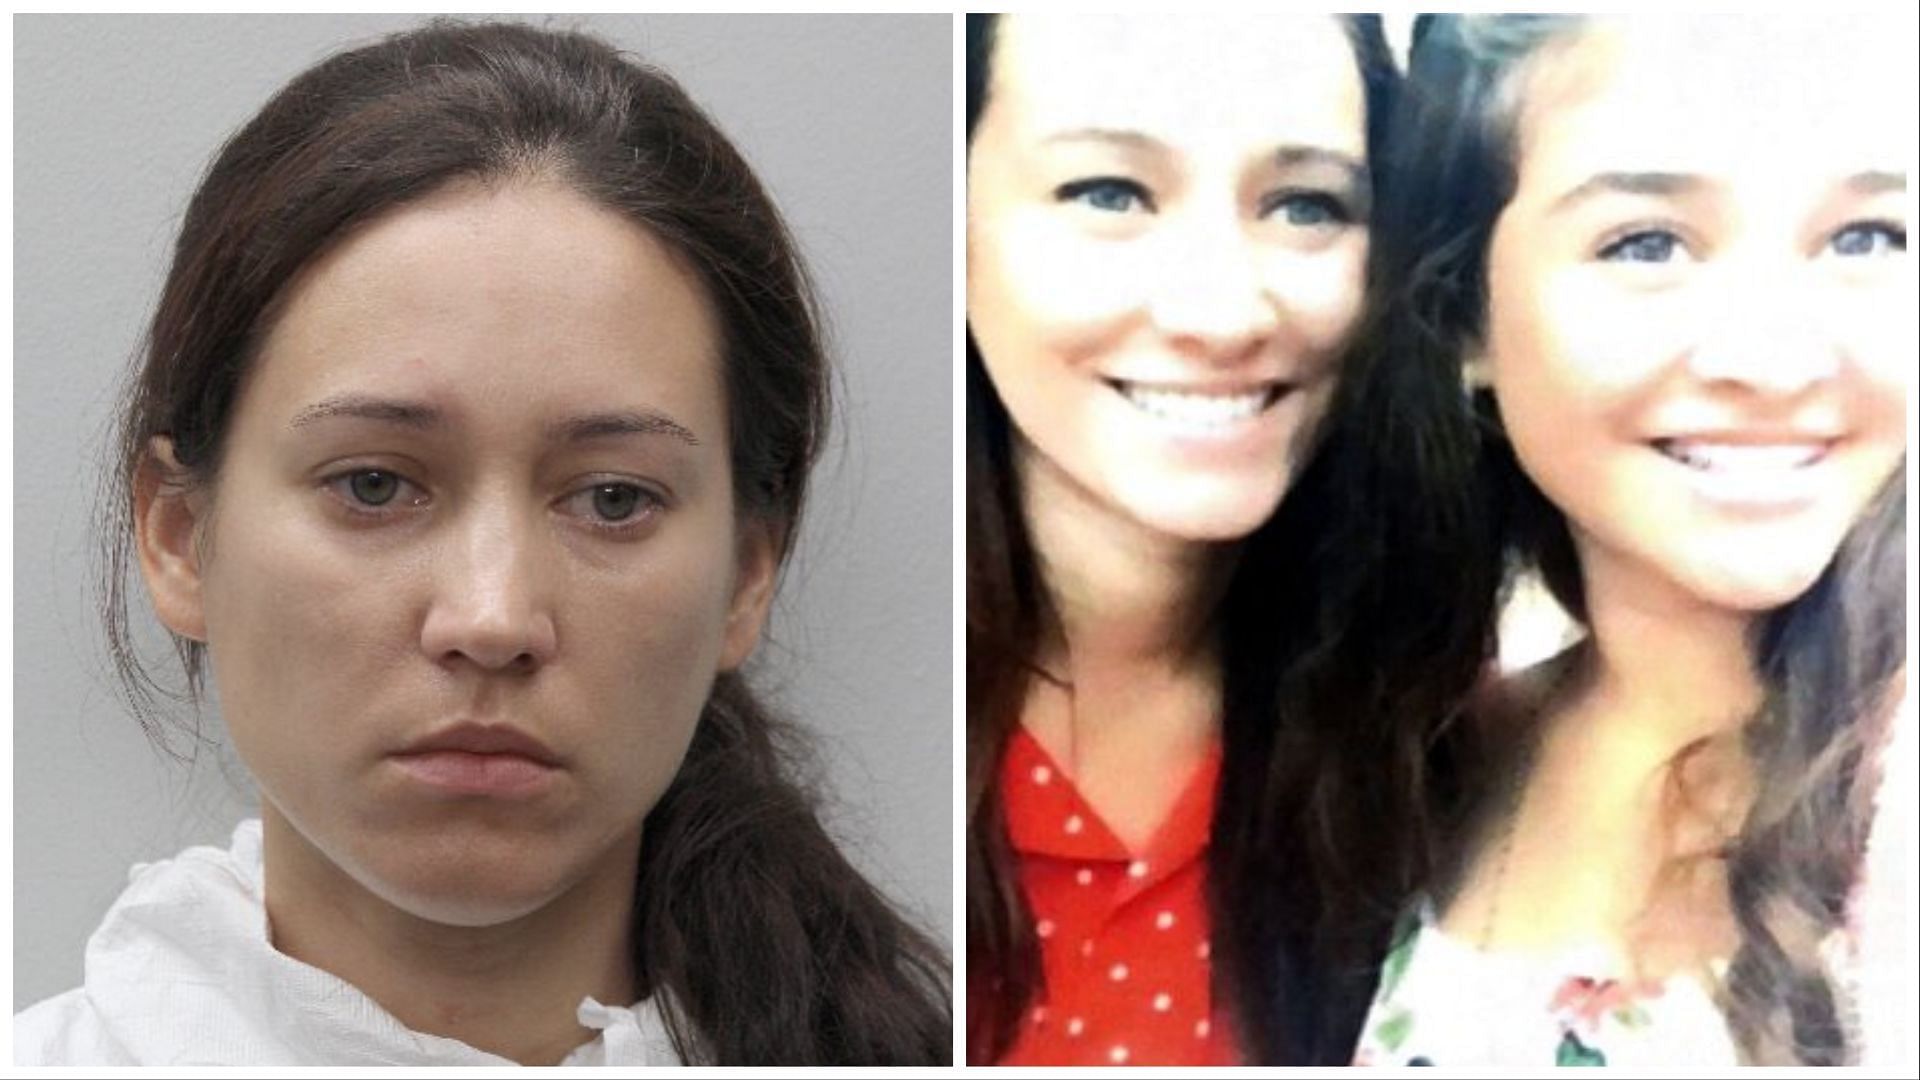 Veronica Youngblood was found guilty of killing her daughters, (Images via @barnardfox5dc and News News News/Twitter)